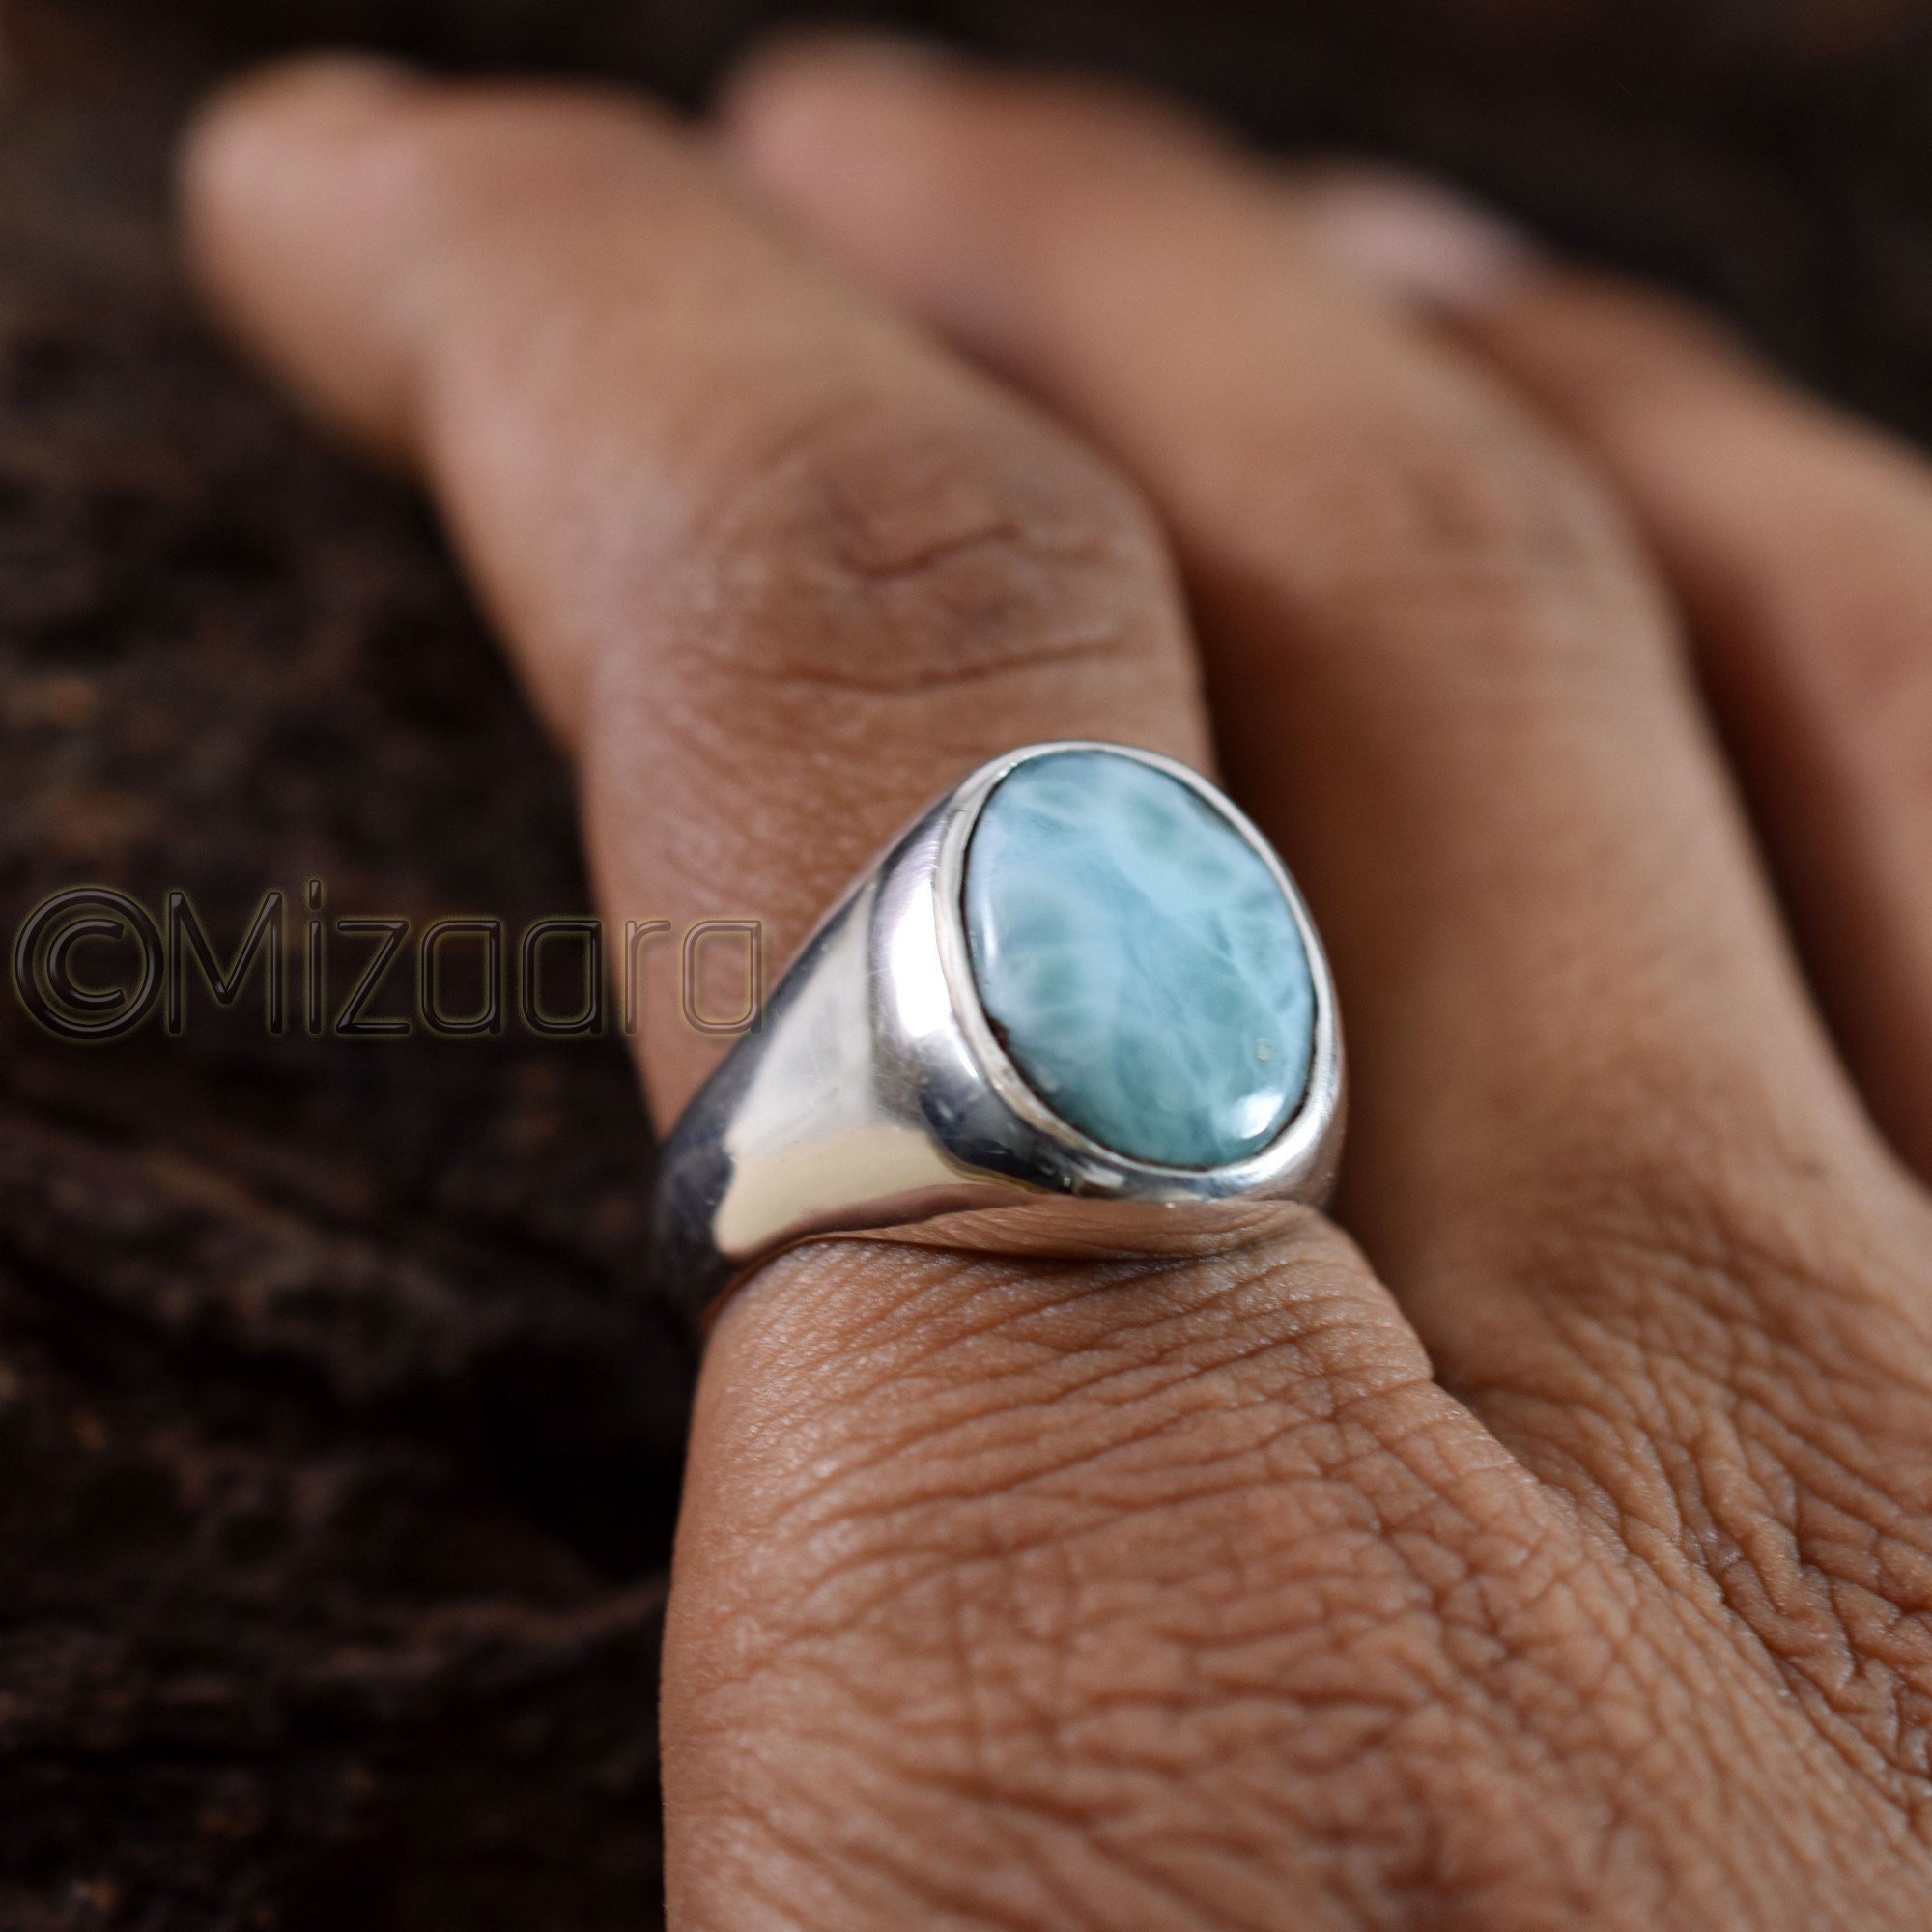 Dominican Larimar Ring 925 Sterling Silver Blue Pectolite Natural Gemstone Father's Day Gift Heavy Ring Handmade